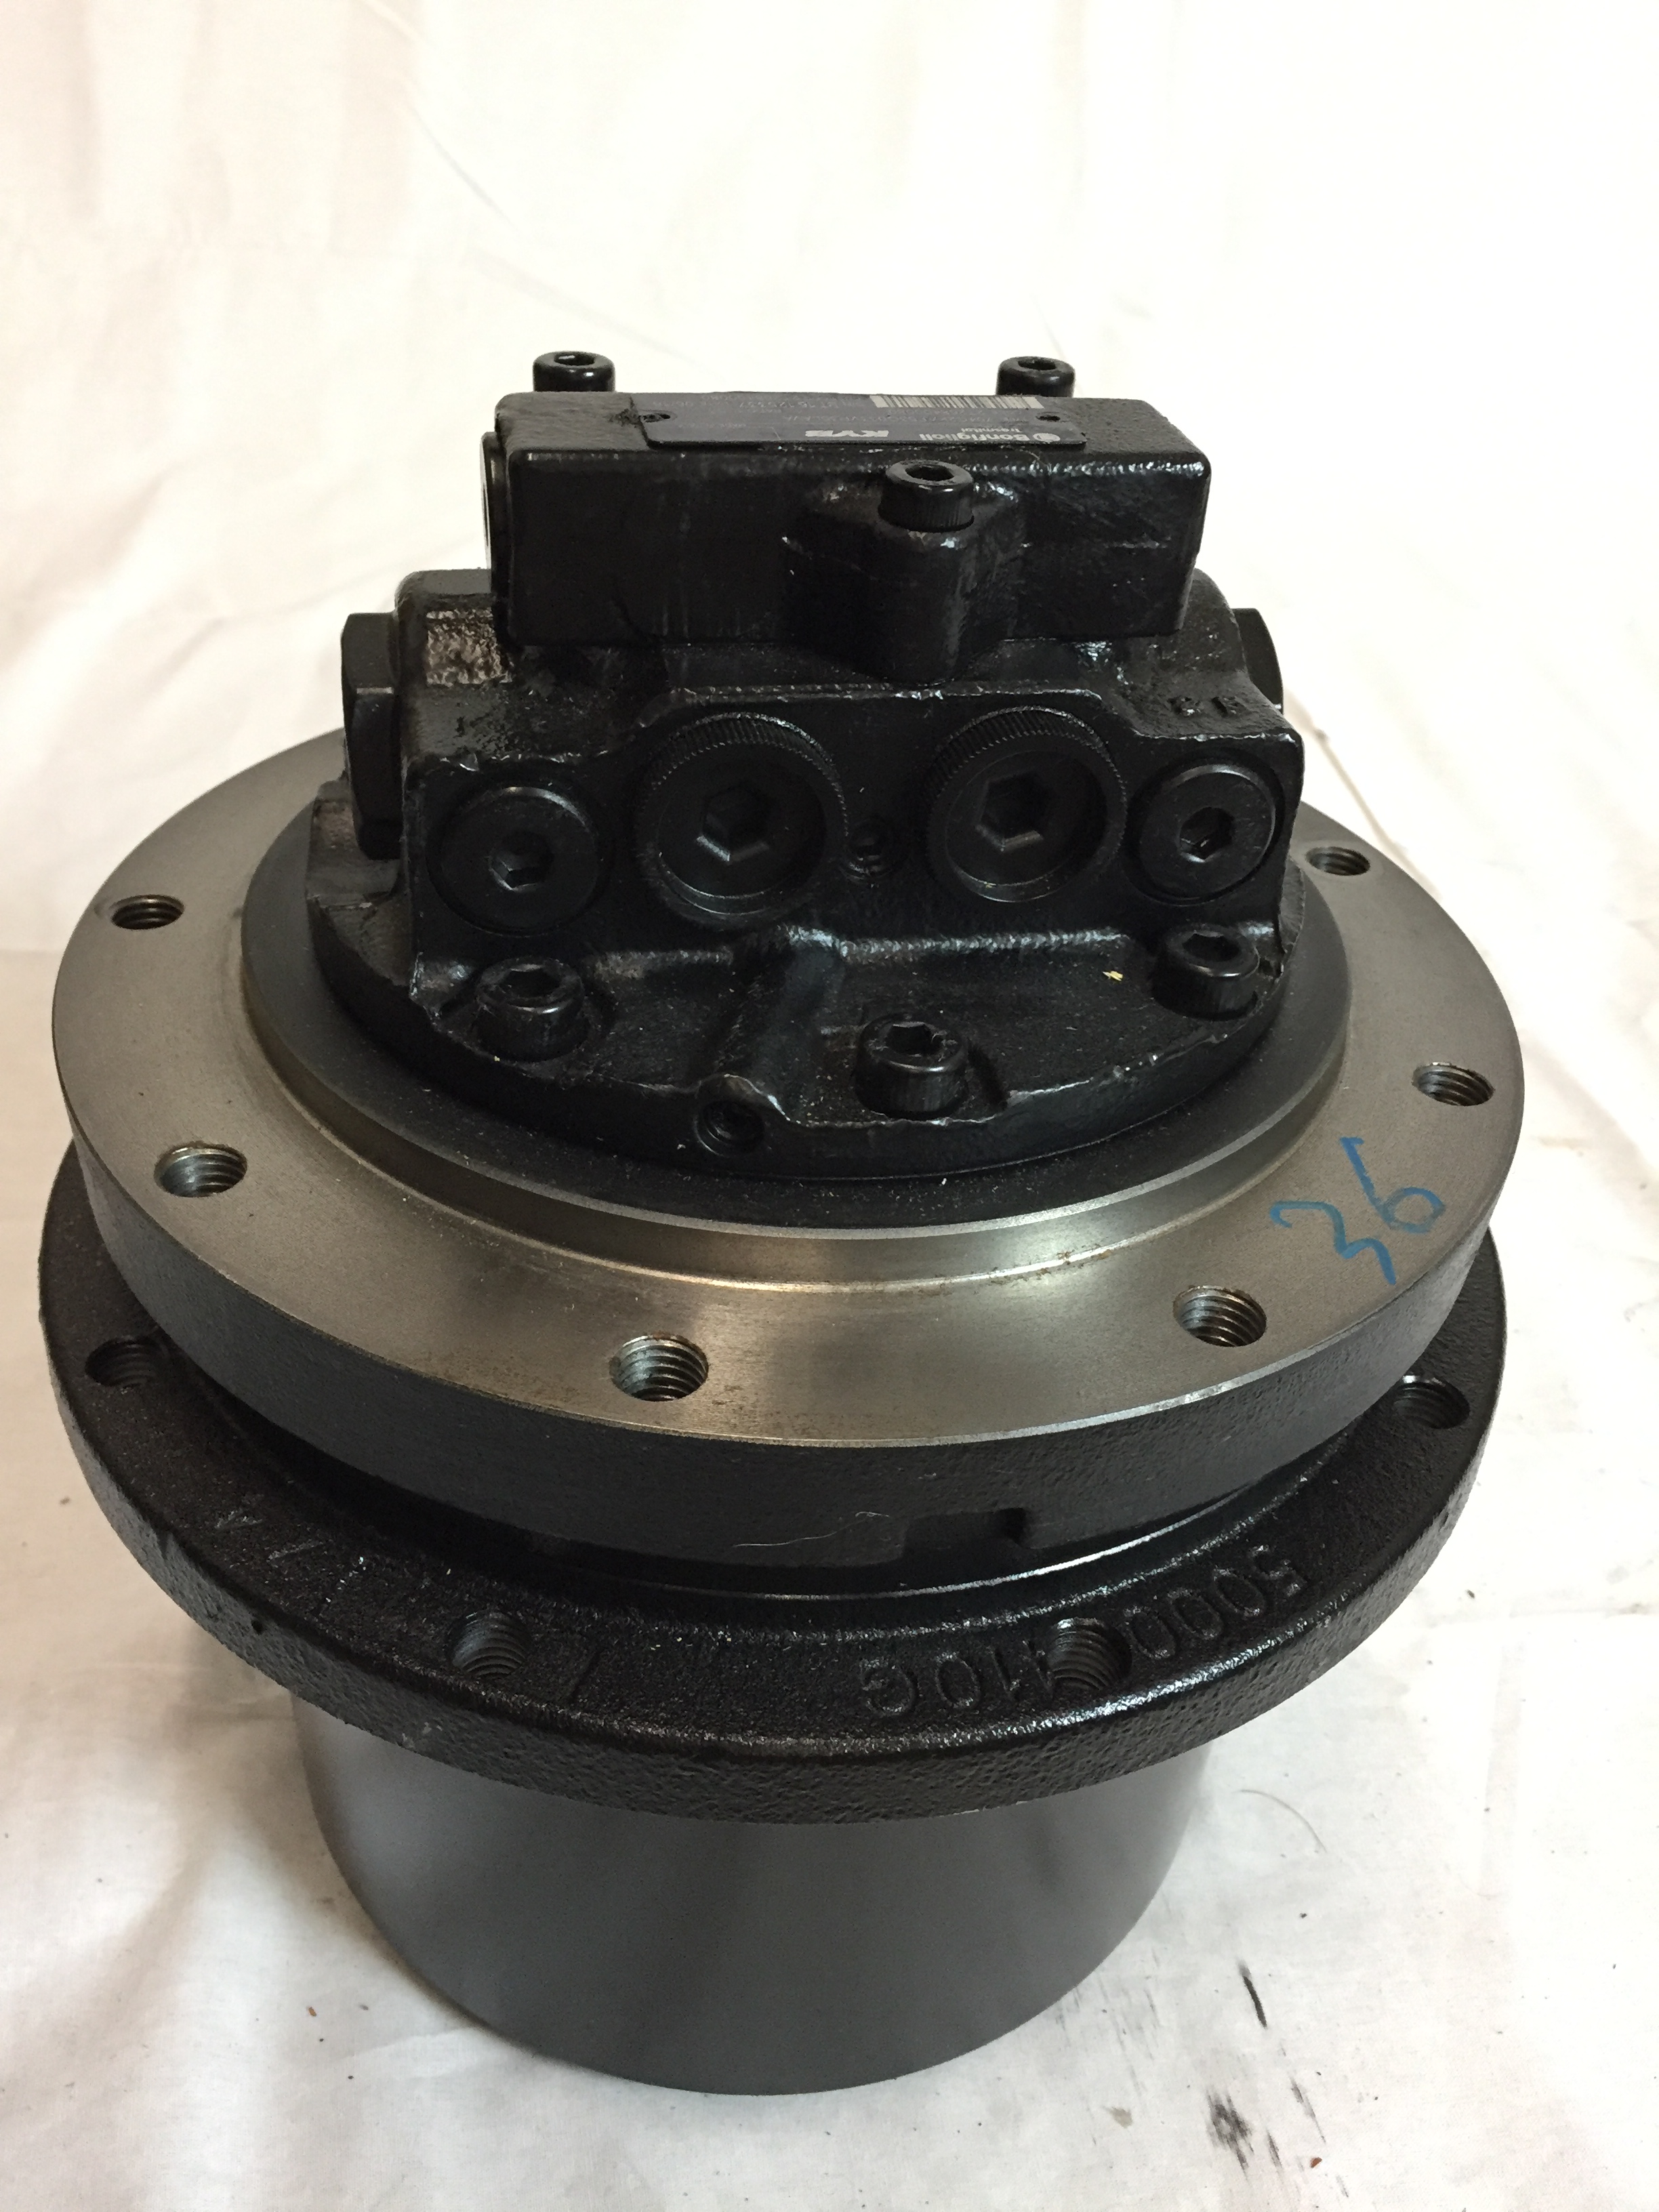 ZX60 Complete Final Drive (Planetary/Travel Drive) with Motor (LOW S/N 244001-274999) Part #4628892,0922101